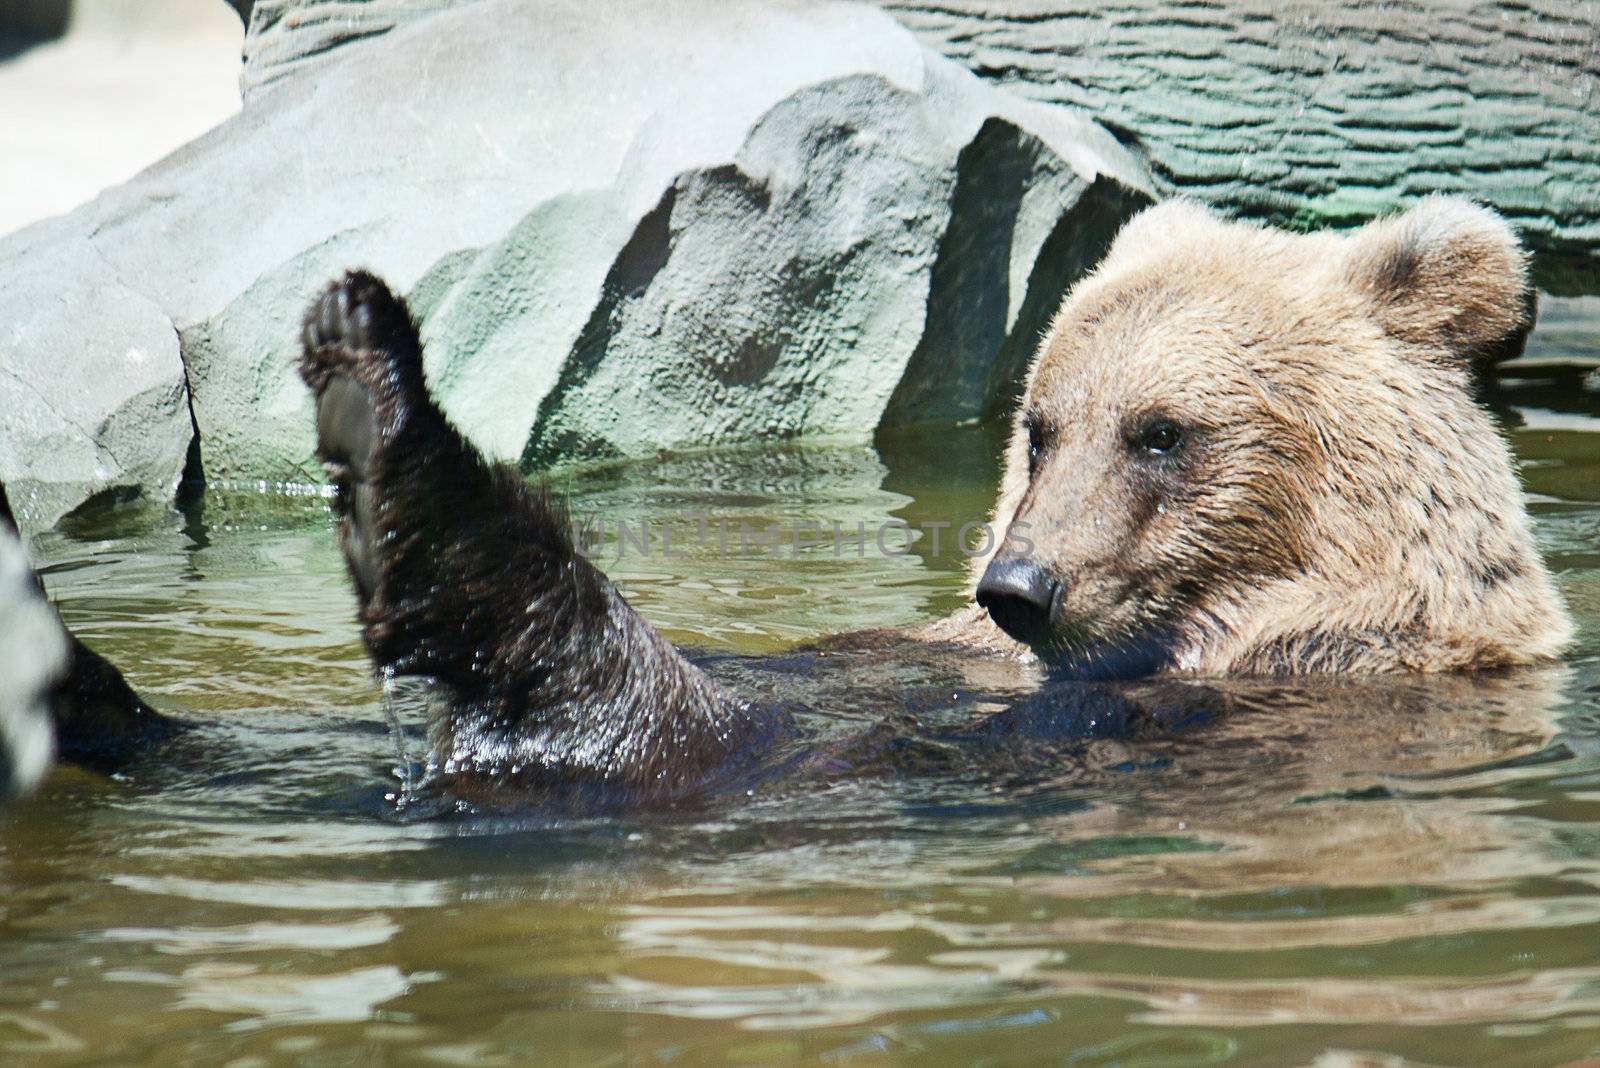 Bear swims in the water at the zoo